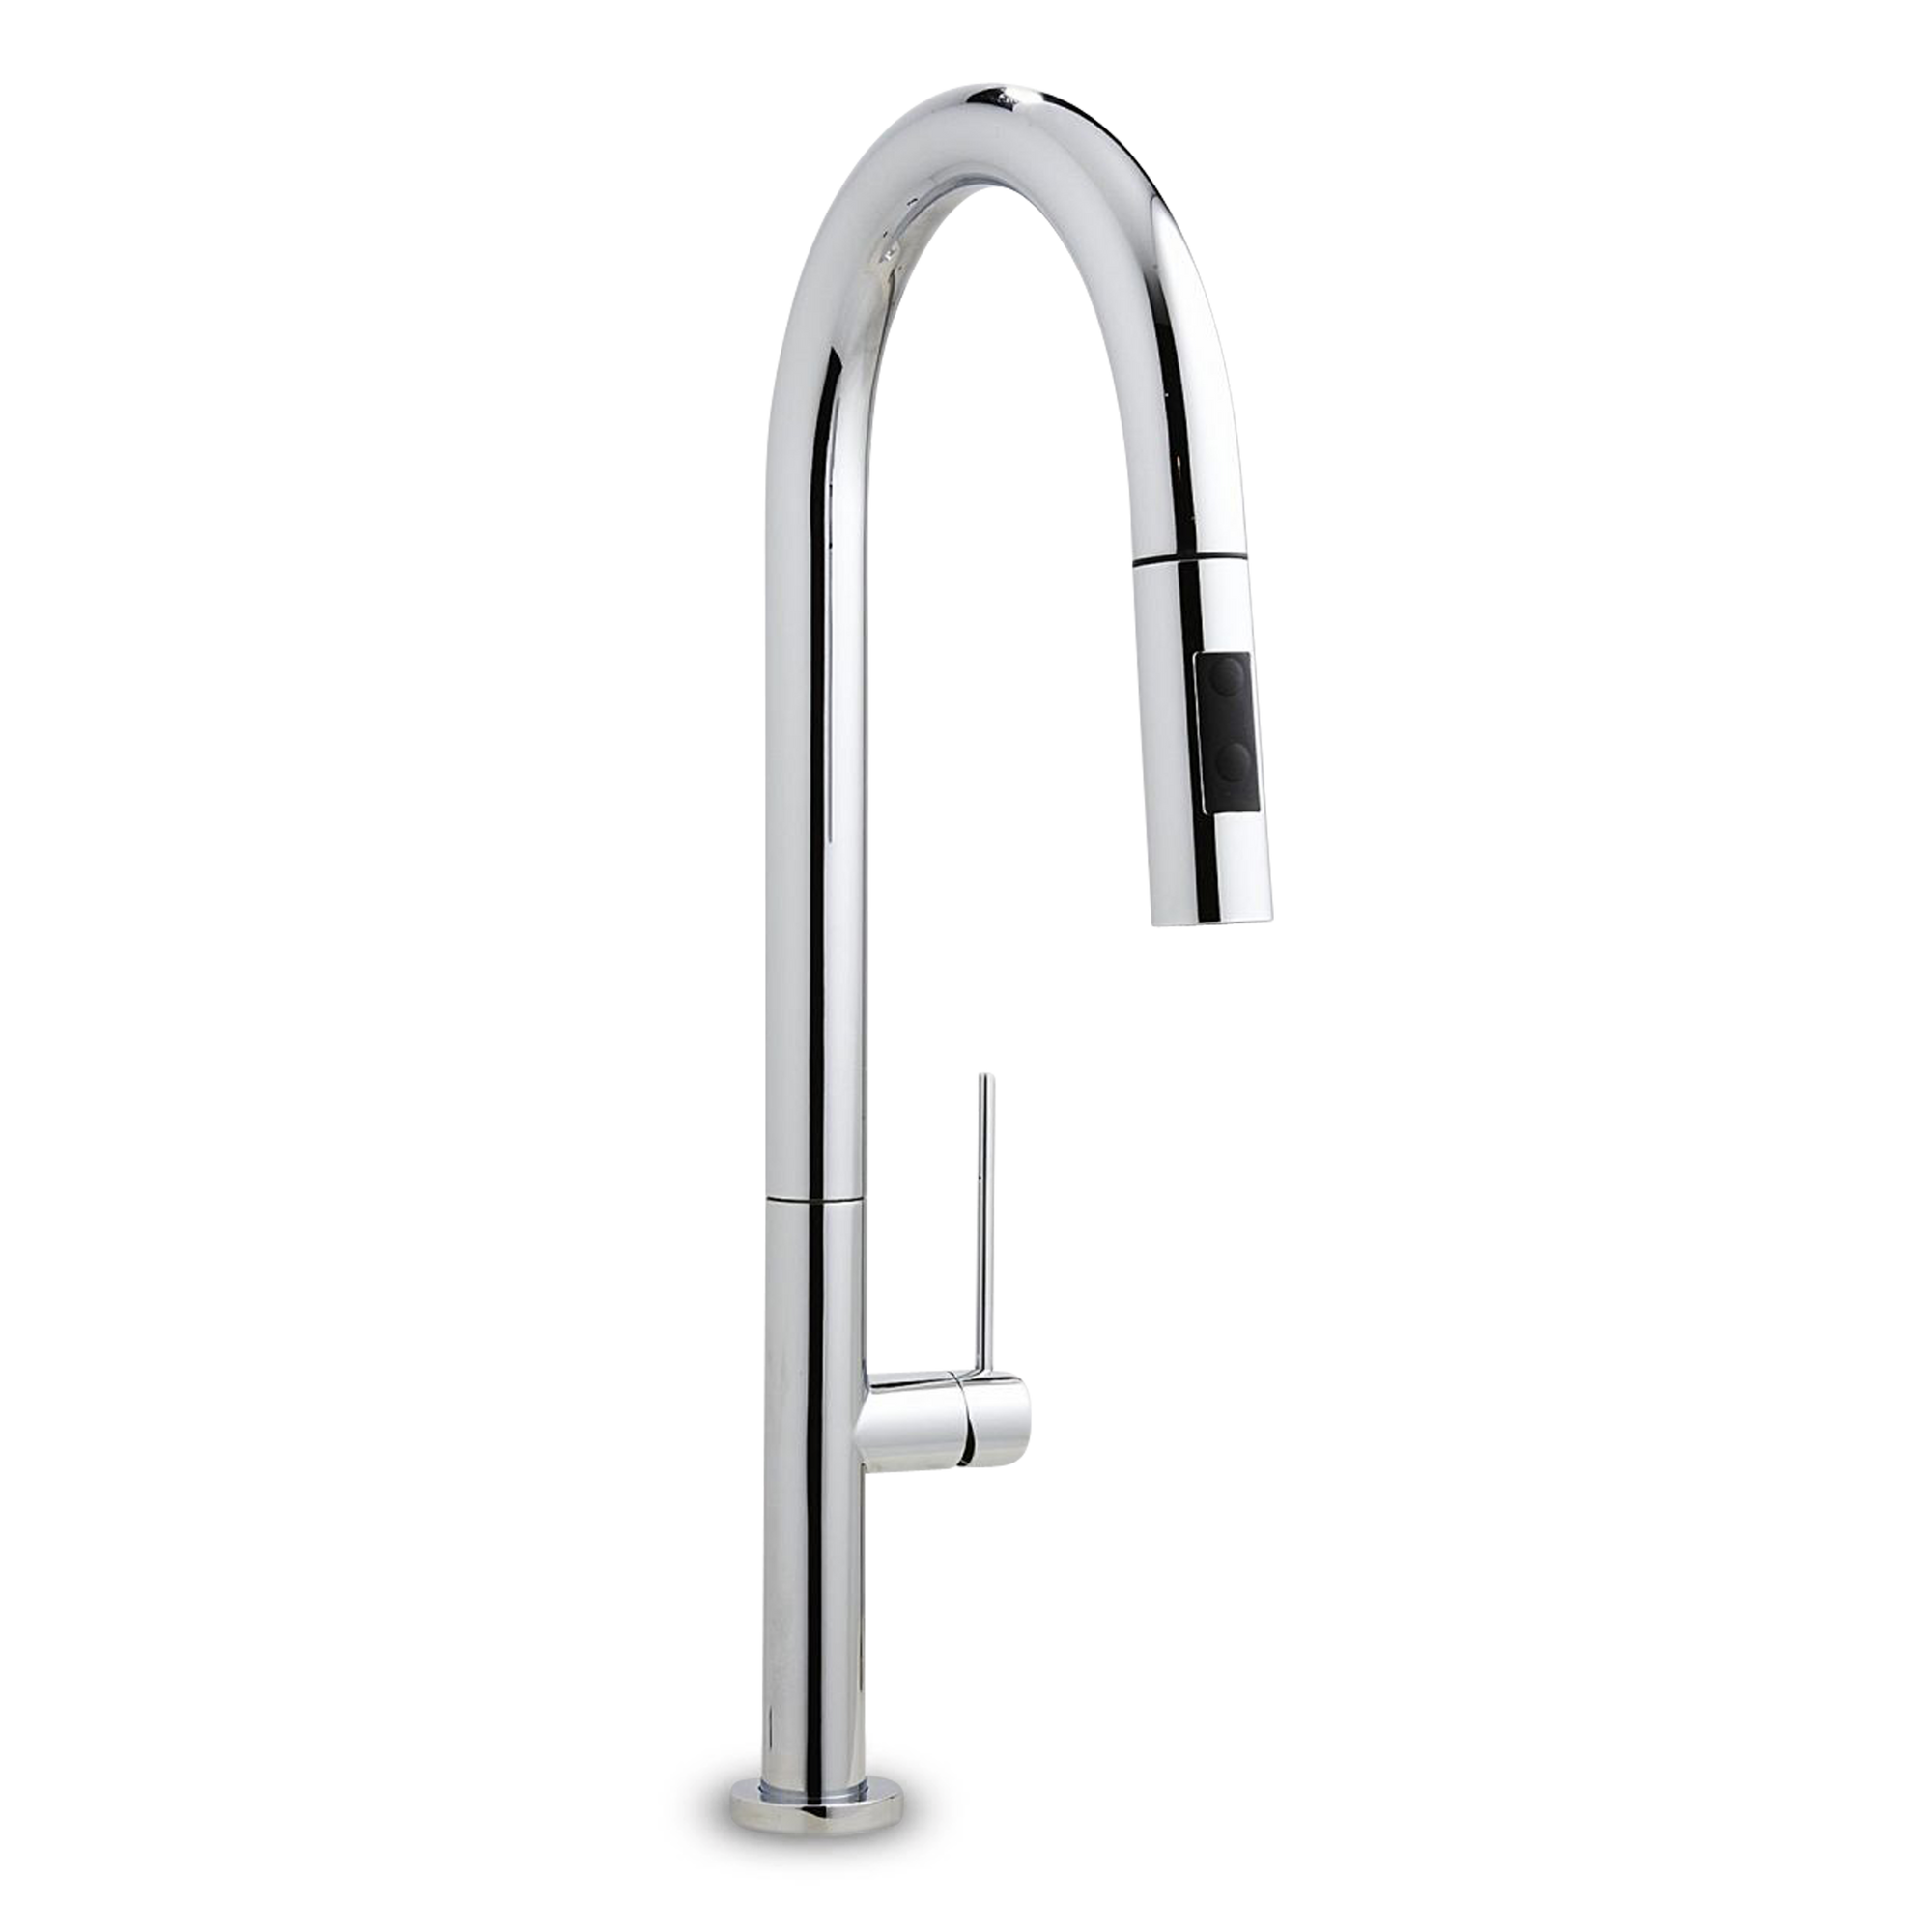 Both sleek and modern, our Aubrey pull-down faucet is formed with a cylindrical arch and includes a pull-down shower double jet.